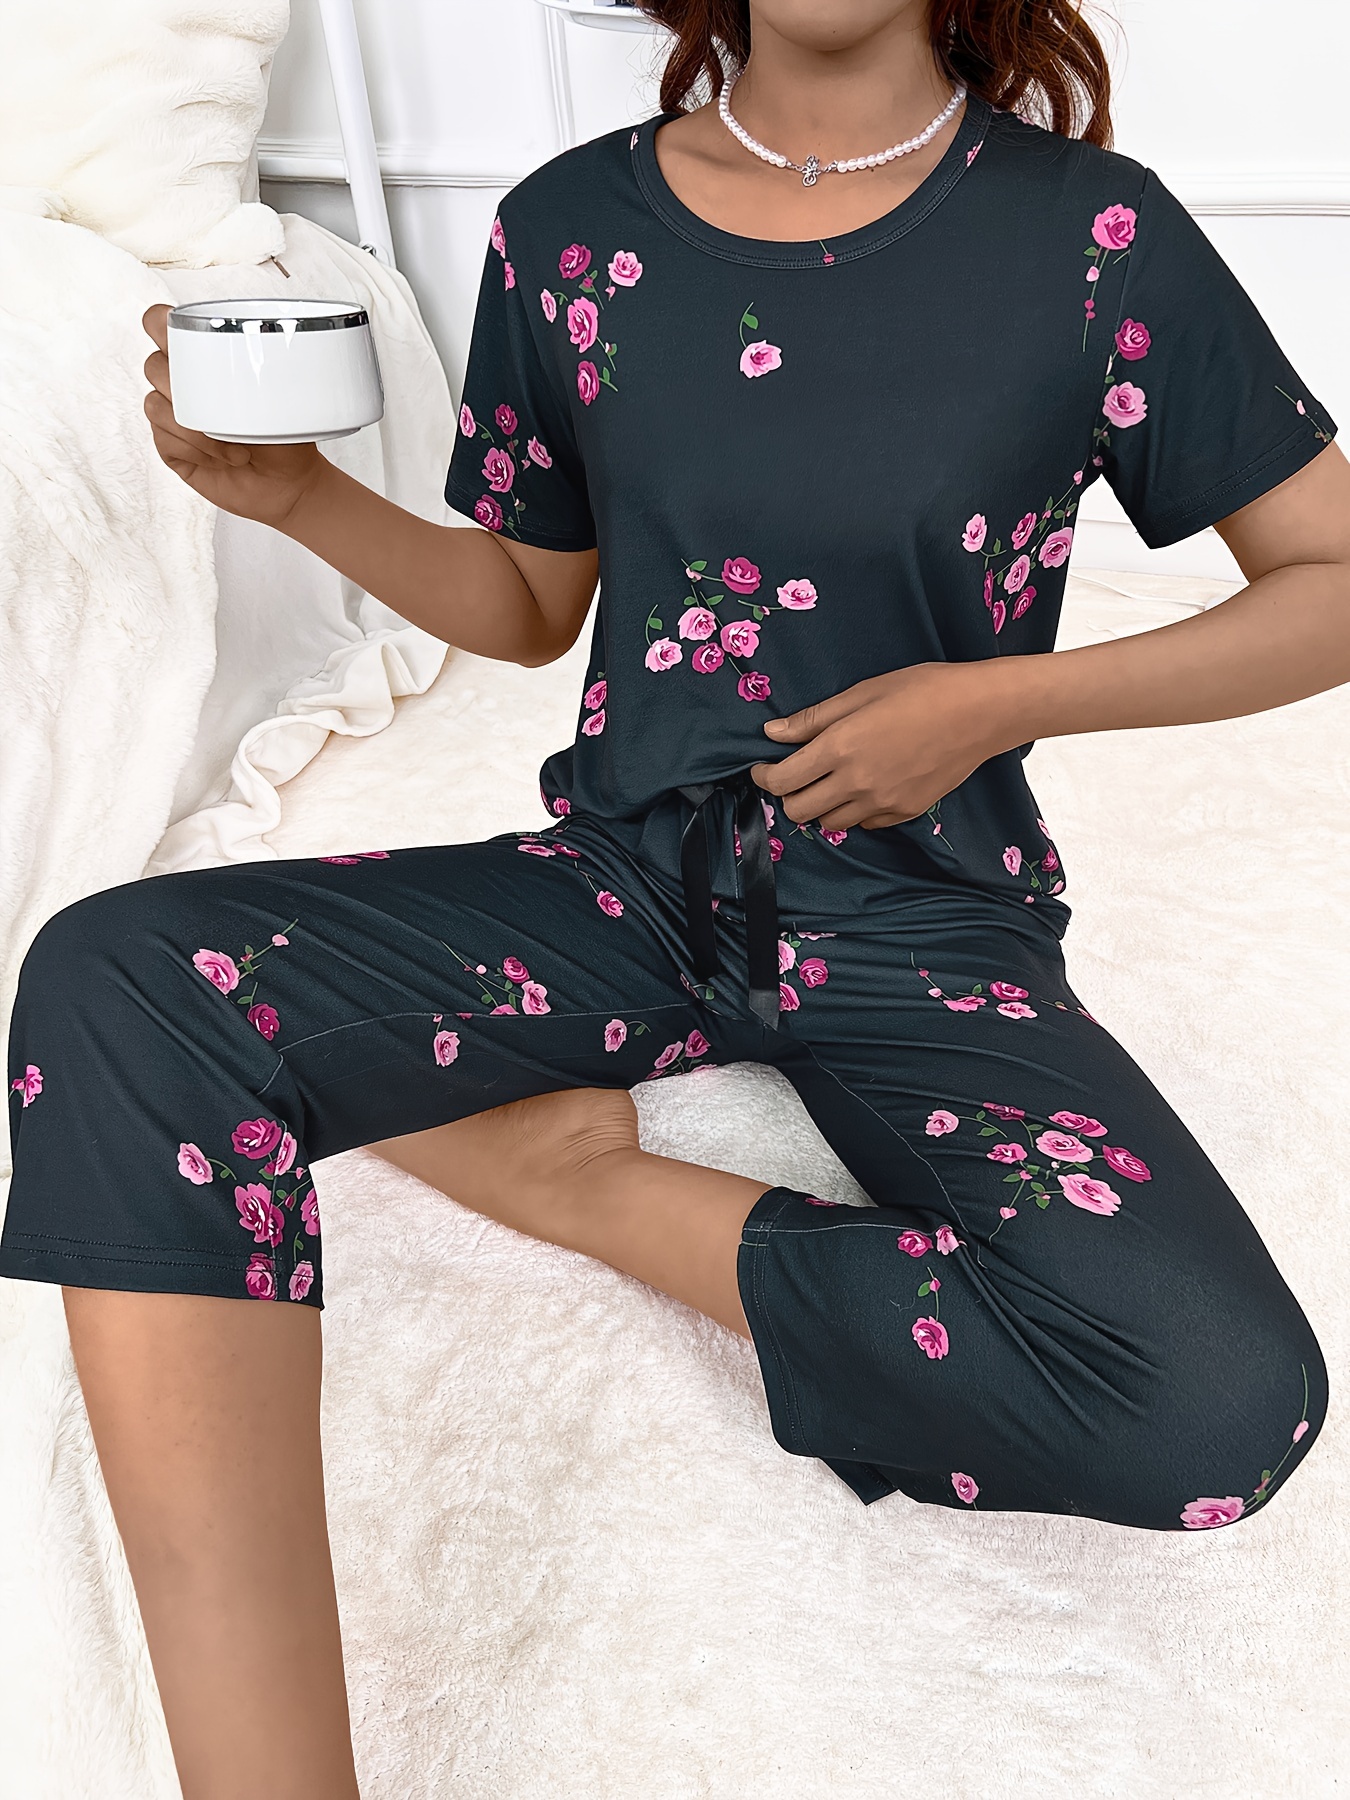 Casual Nights Women's Short Sleeve Top with Capri Pants Pjs Floral